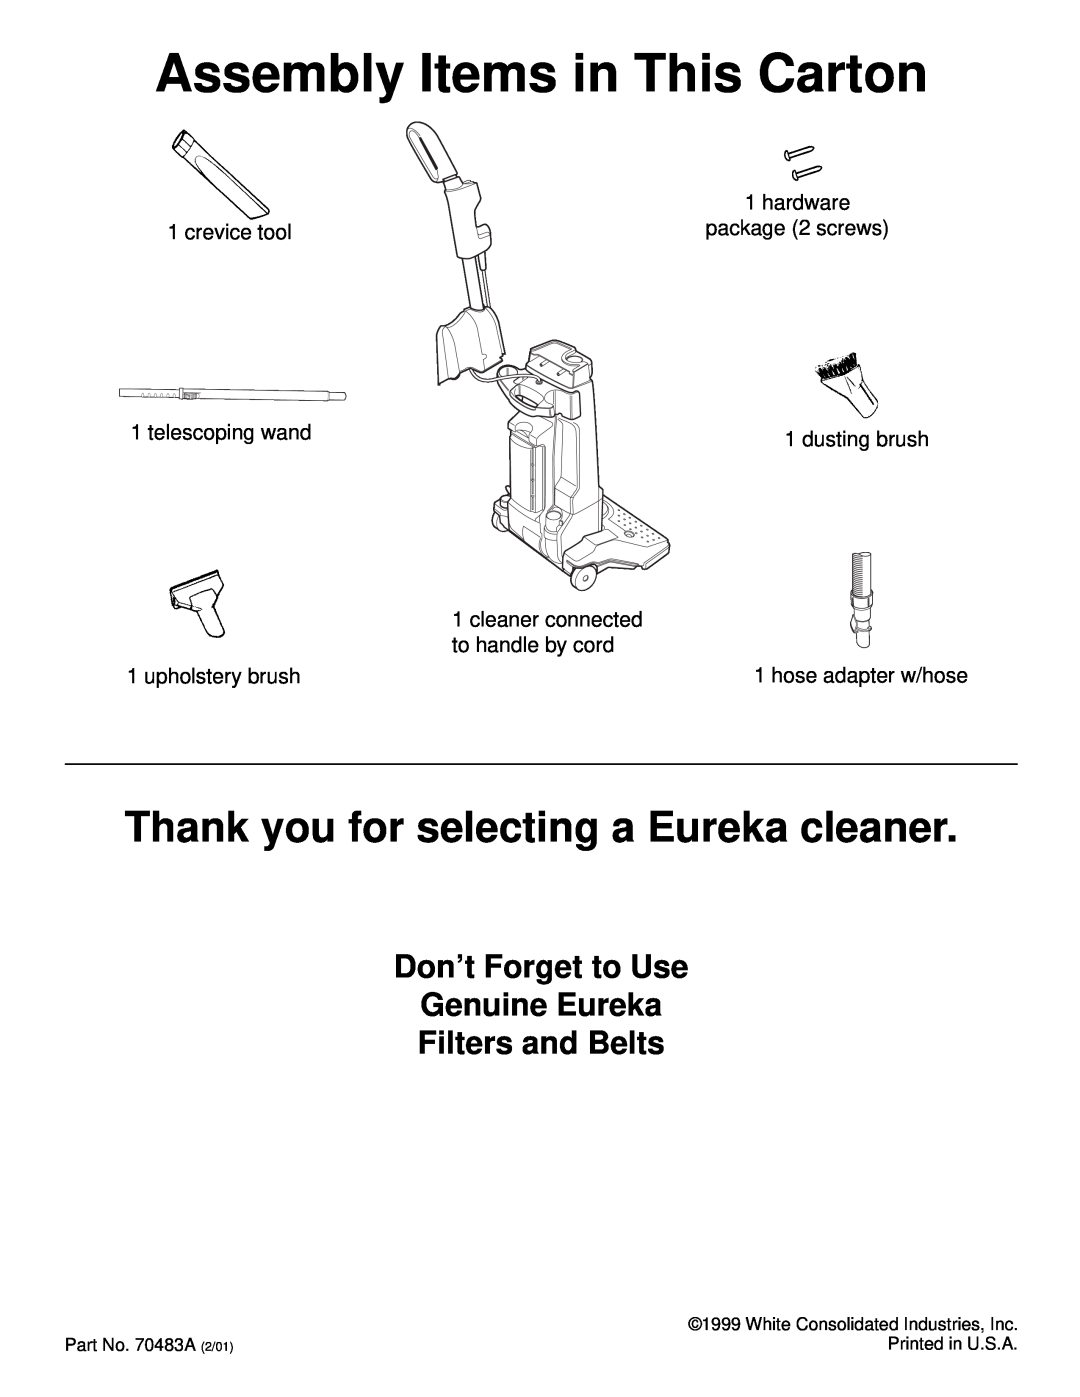 Eureka 4500 Assembly Items in This Carton, Thank you for selecting a Eureka cleaner, hardware, crevice tool, dusting brush 